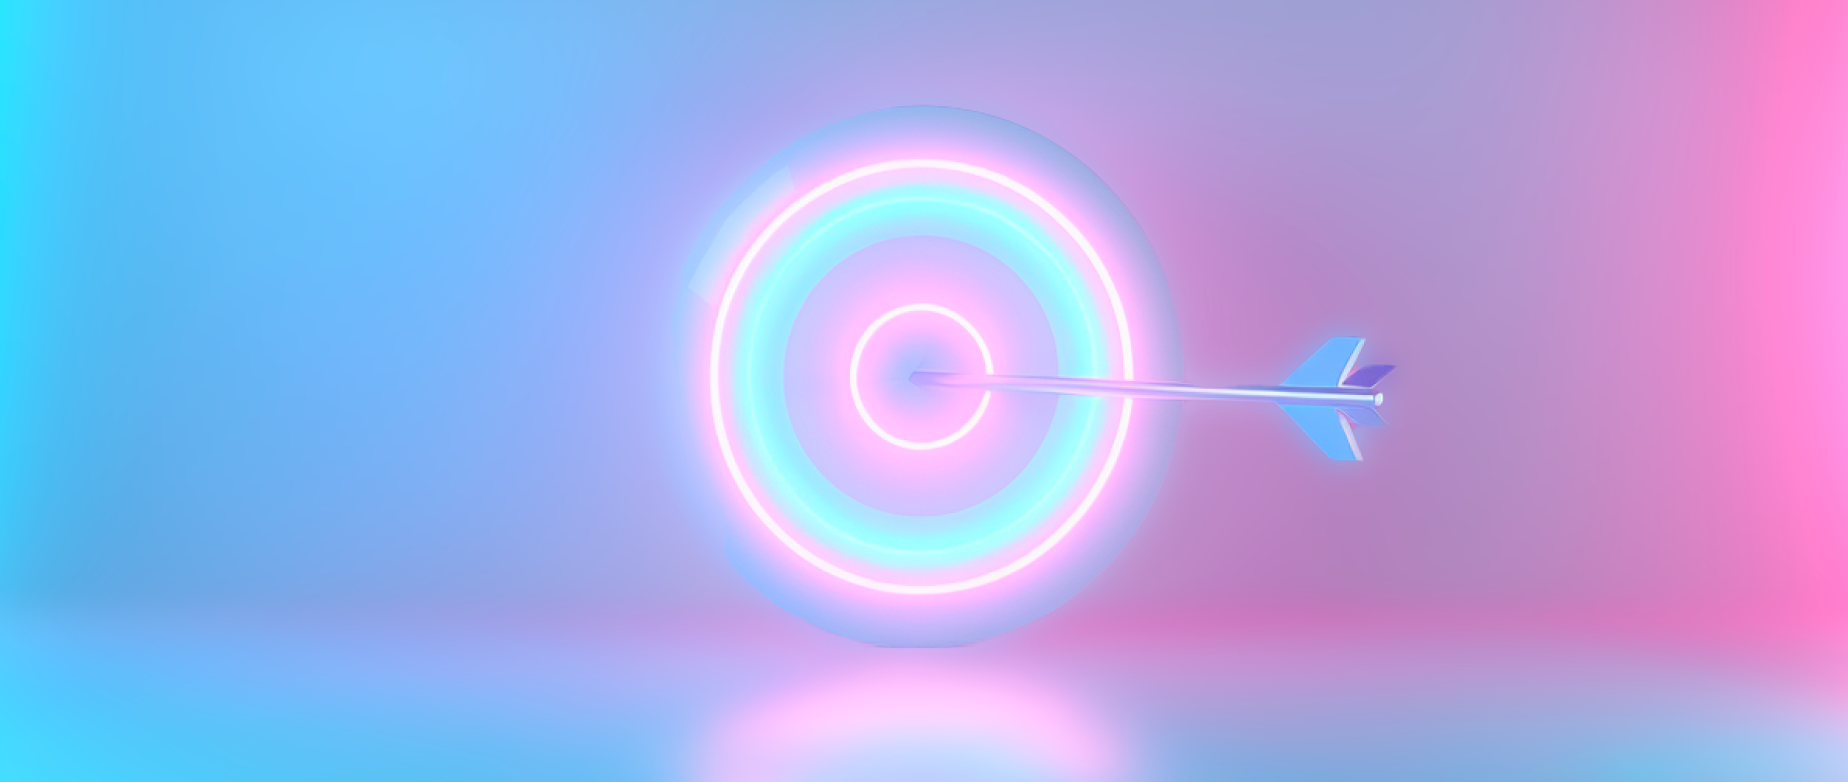 Illuminated target with an arrow in the center on a blue and pink background: campaign optimization 